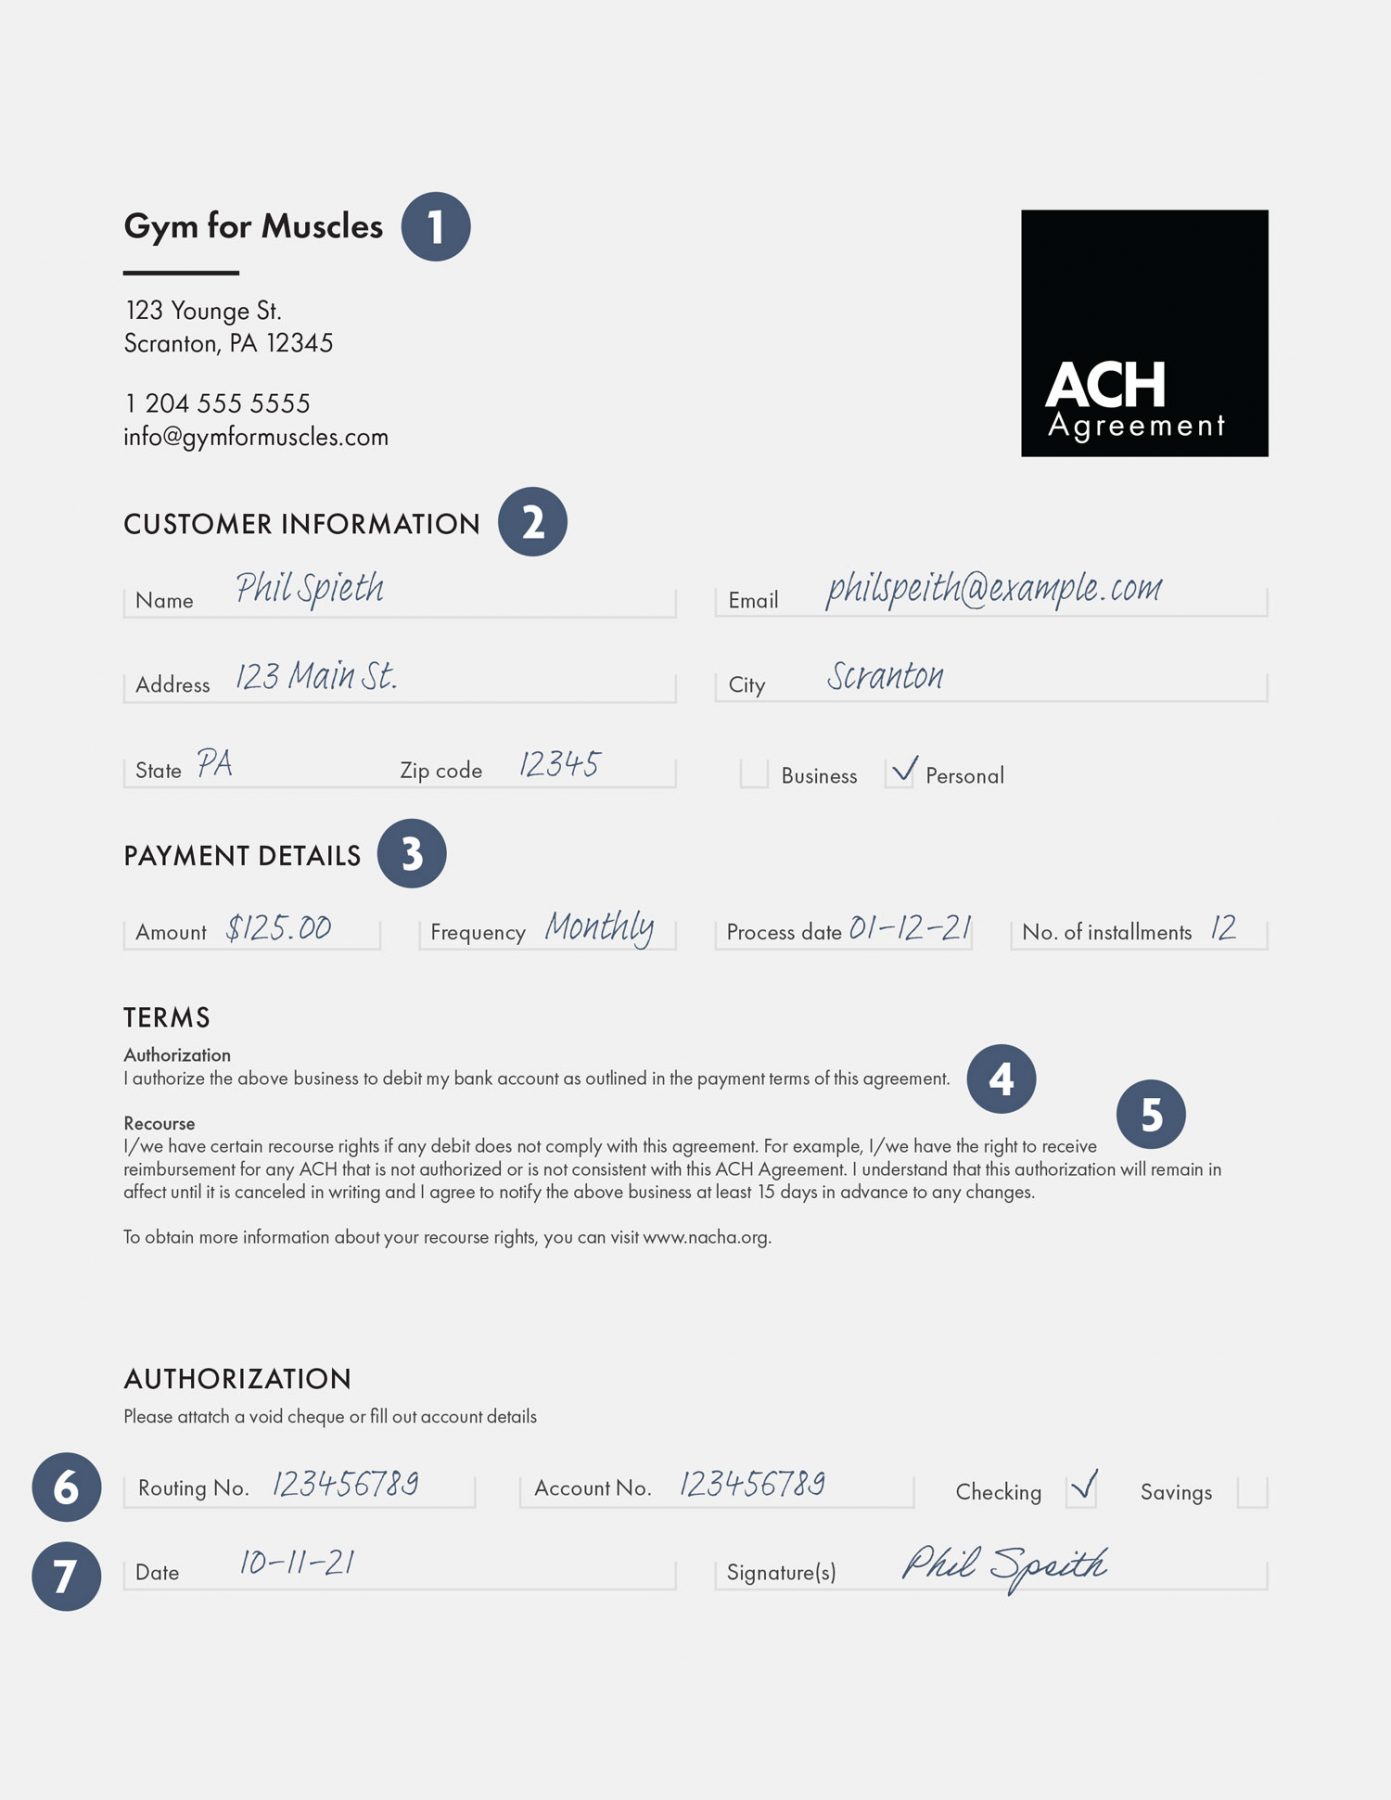 ach-authorization-form-how-to-create-one-rotessa-payments-free-download-nude-photo-gallery